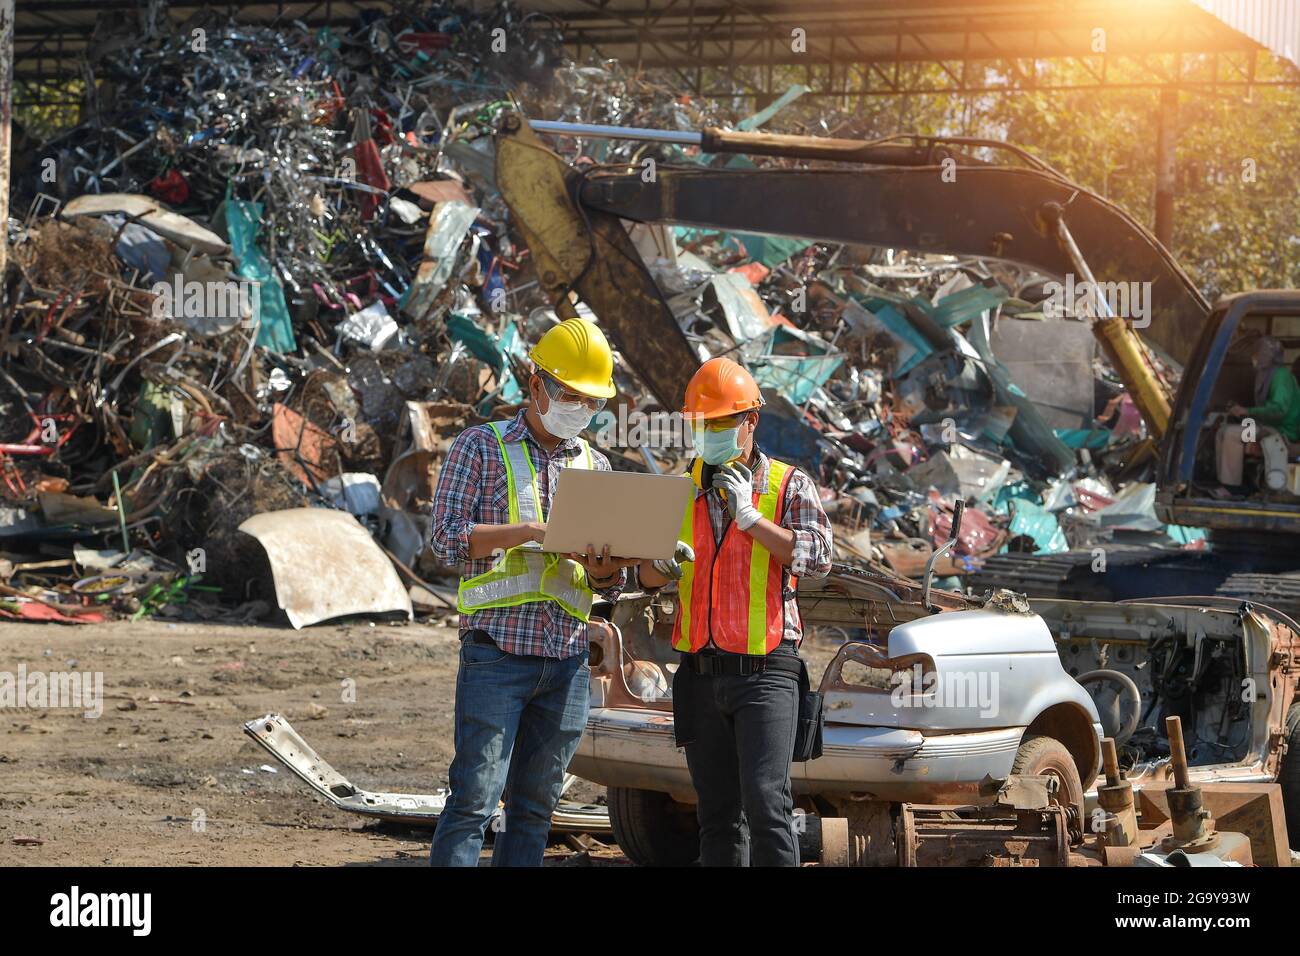 Two workers looking at a laptop at a scrap metal yard, Thailand Stock Photo